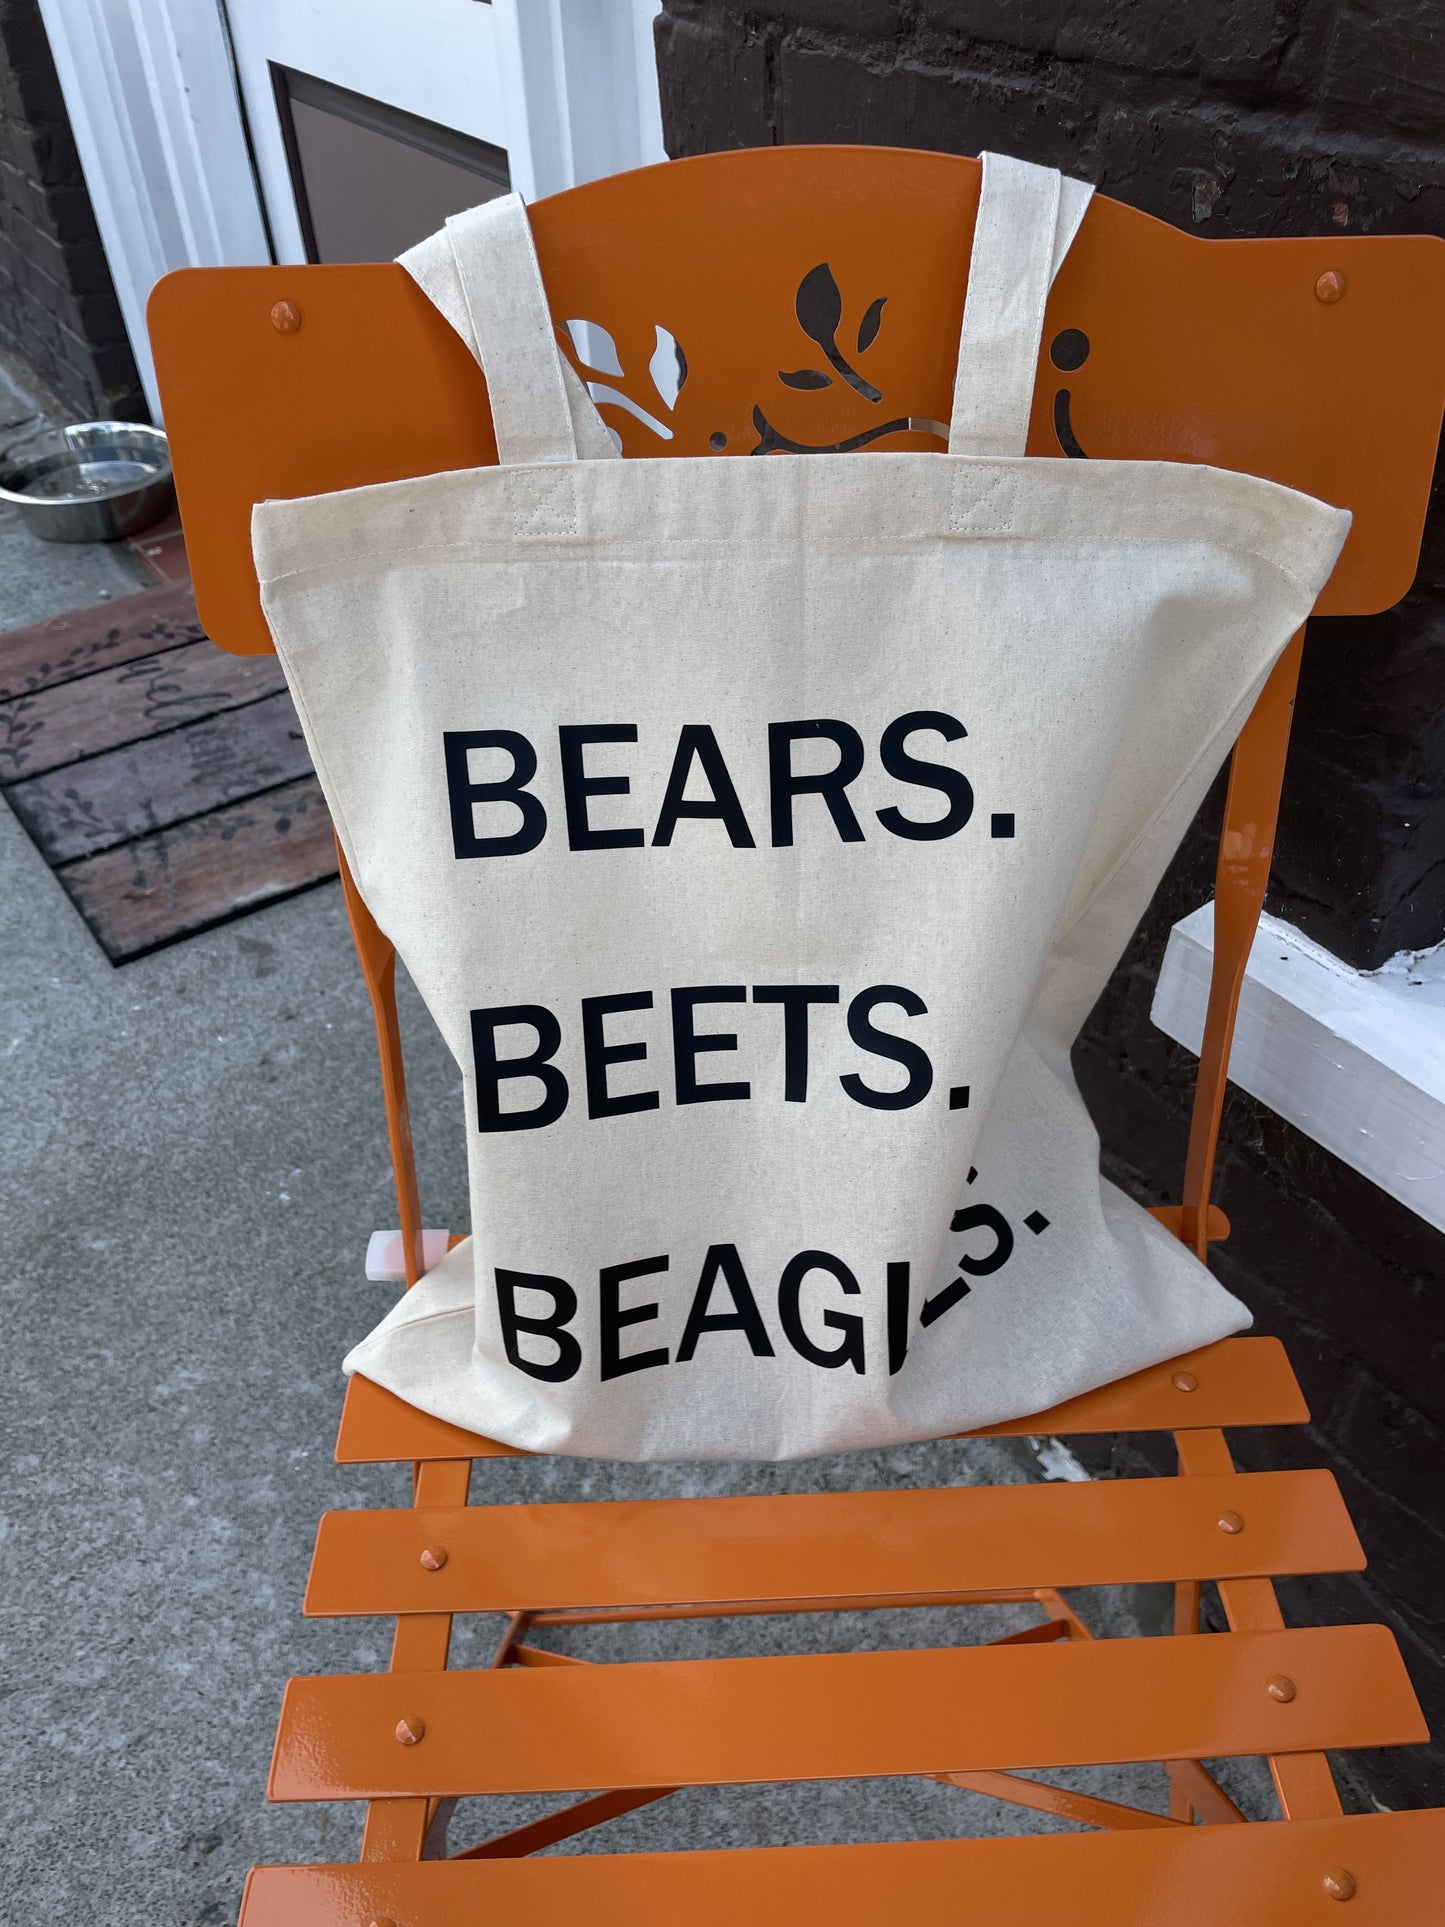 Personalized Tote Bag - With 3-4 Lines of Custom Text